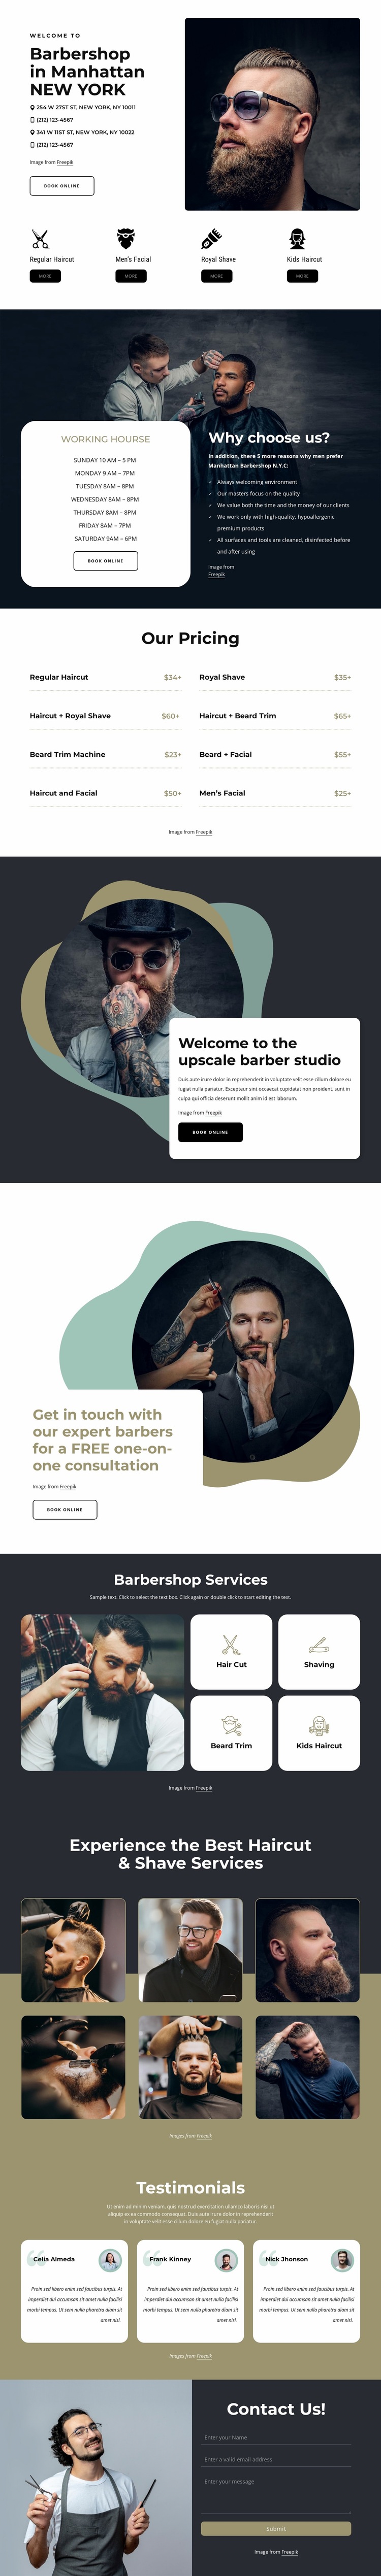 Hight quality grooming services Website Builder Templates